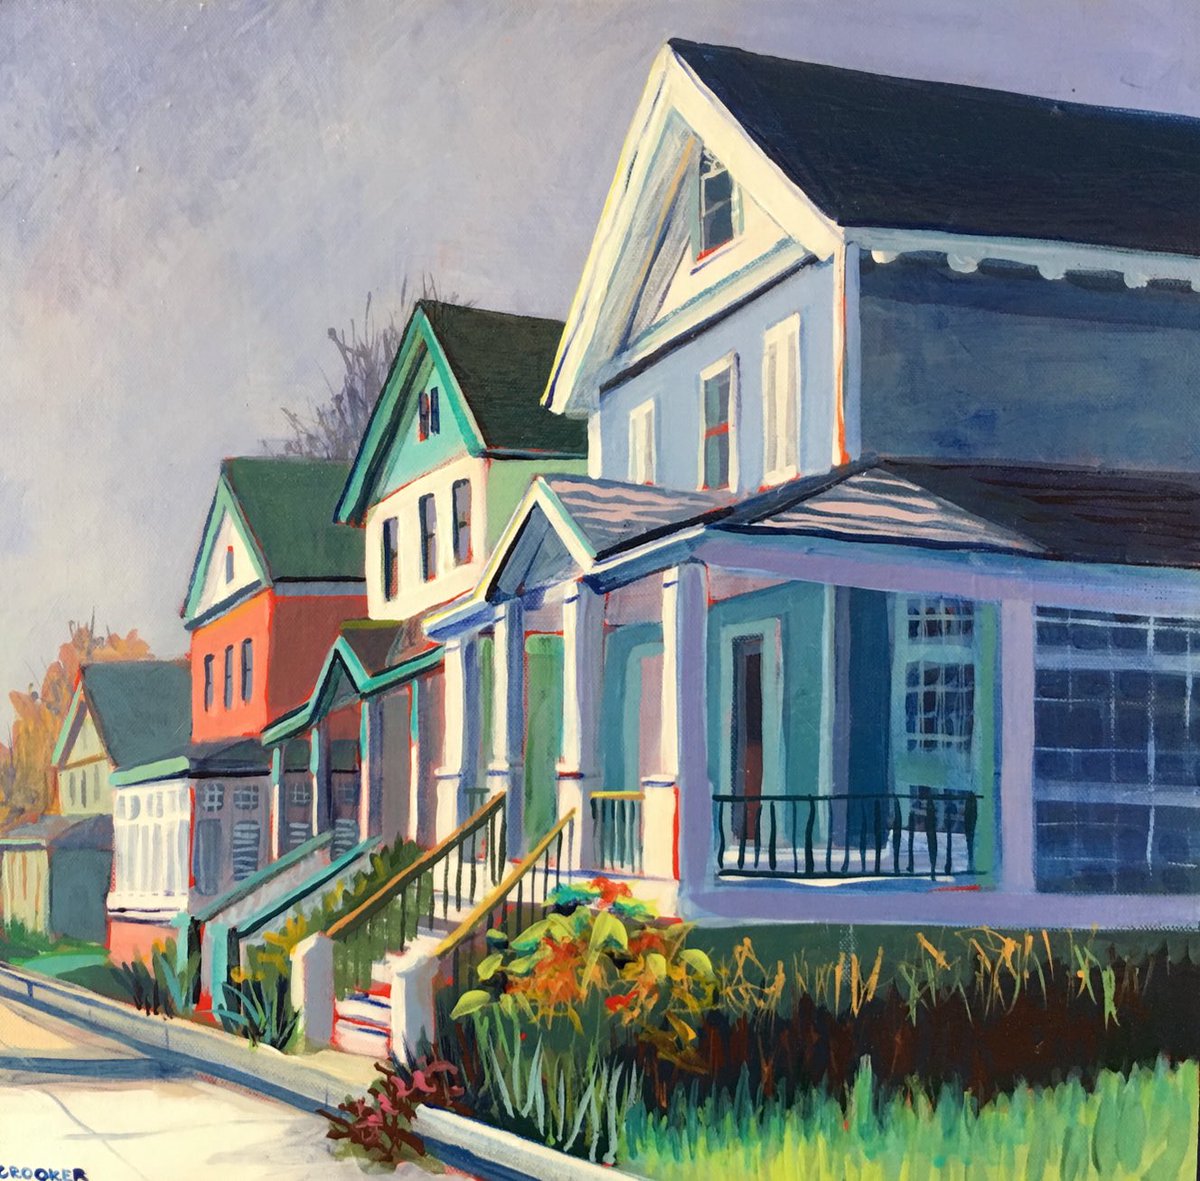 Tweeting a #bright and #colorful #painting a day. #Victorians in #Lewes #De. jancrooker.com